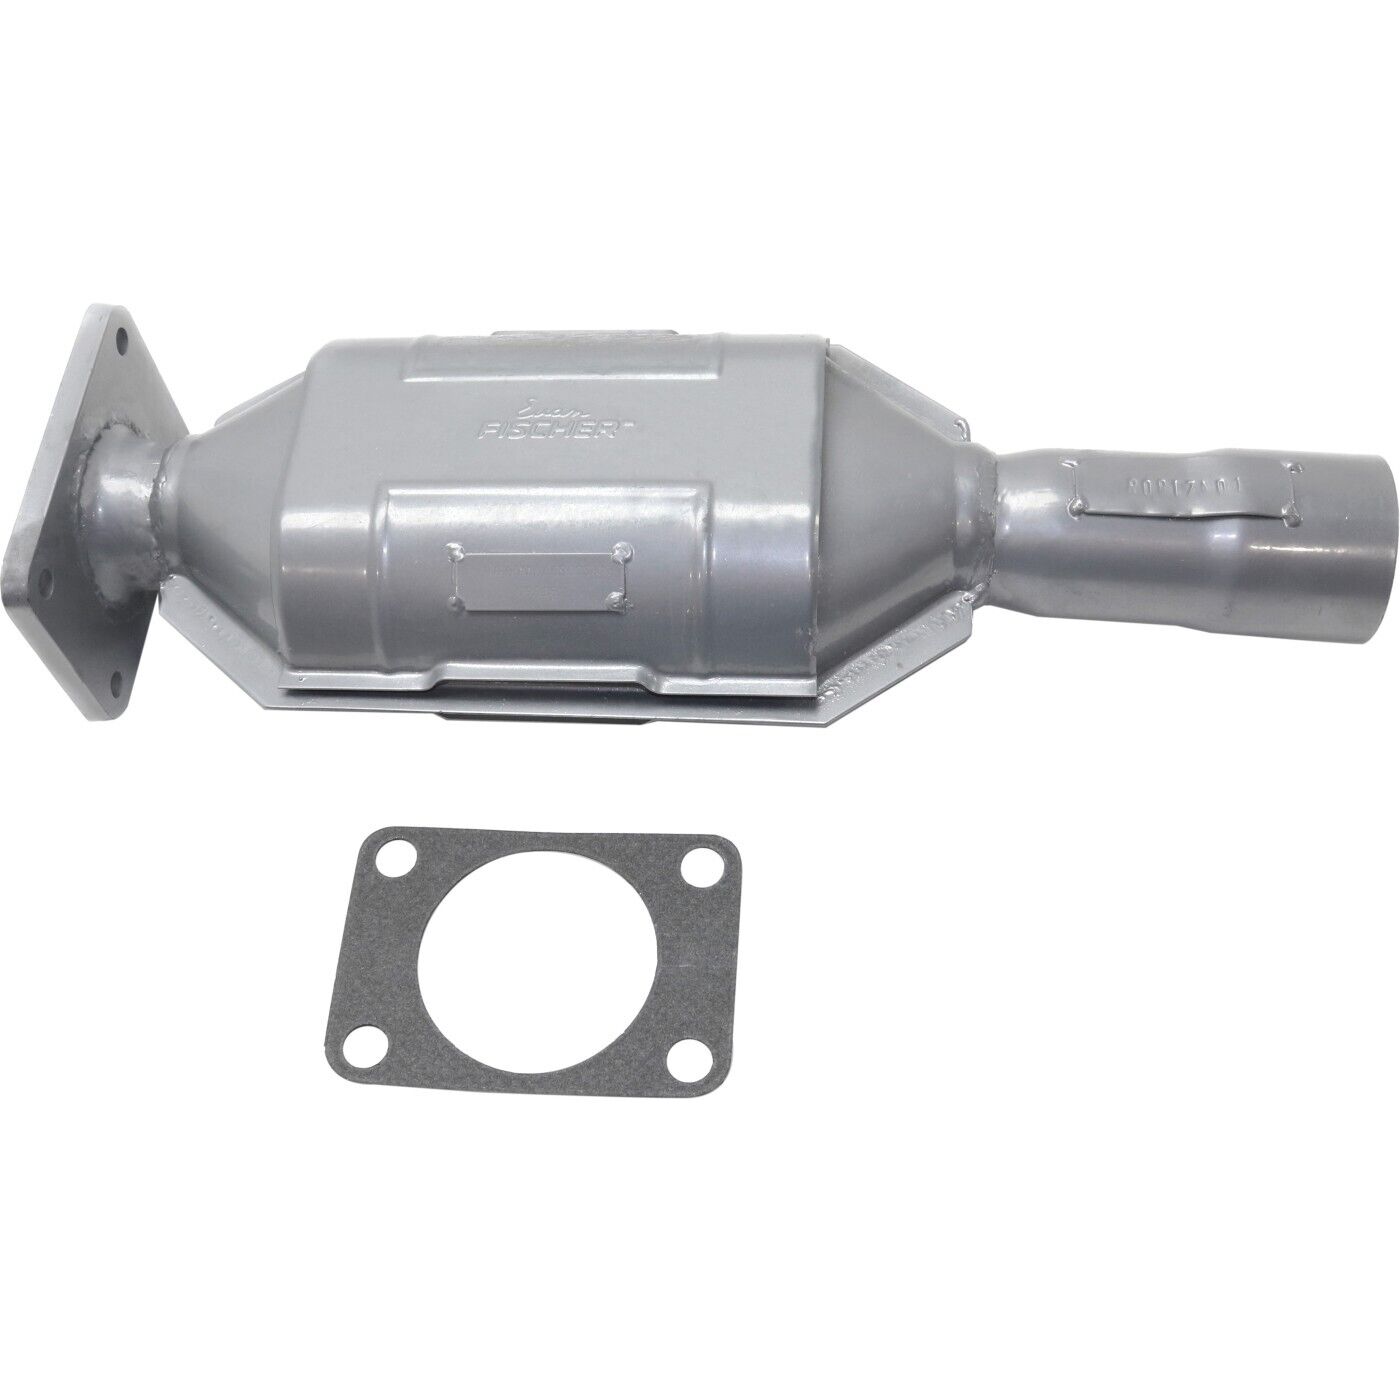 Catalytic Converter For 2006-2011 Buick Lucerne and Cadillac DTS 2000-05 DeVille